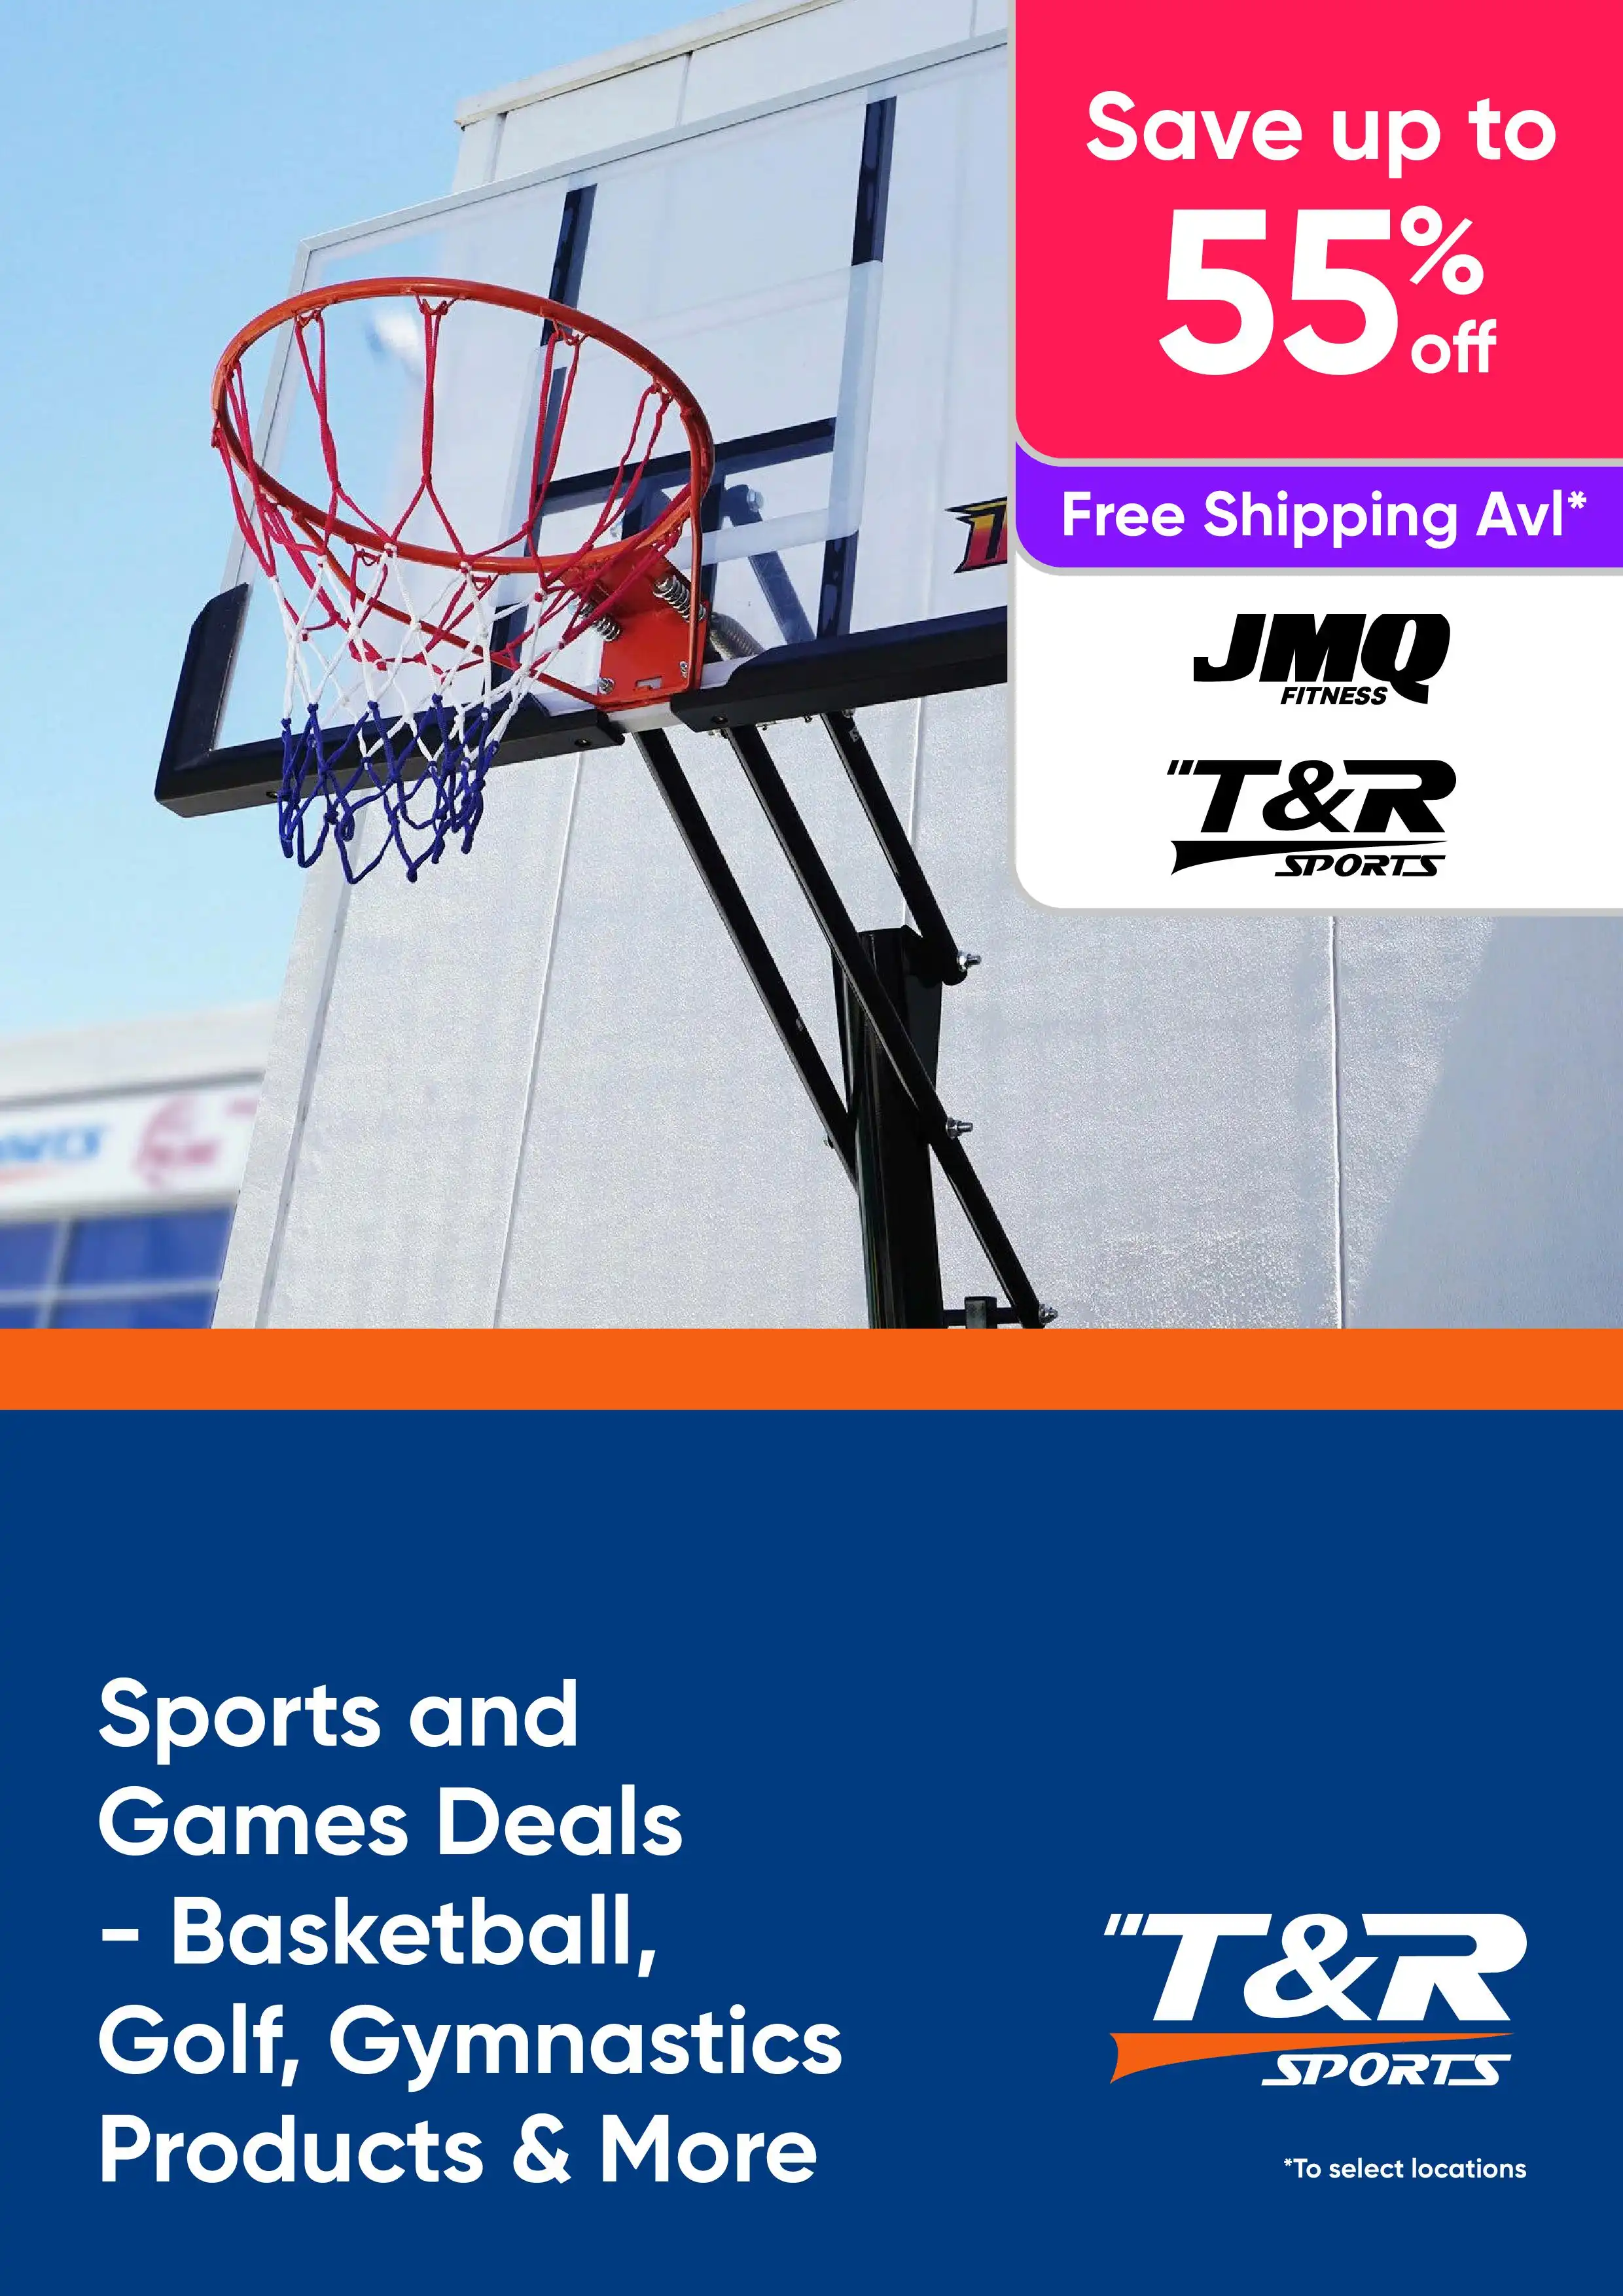 Sports and Games Deals Up to 55% Off - Shop Basketball, Golf, Gymnastics Products and More